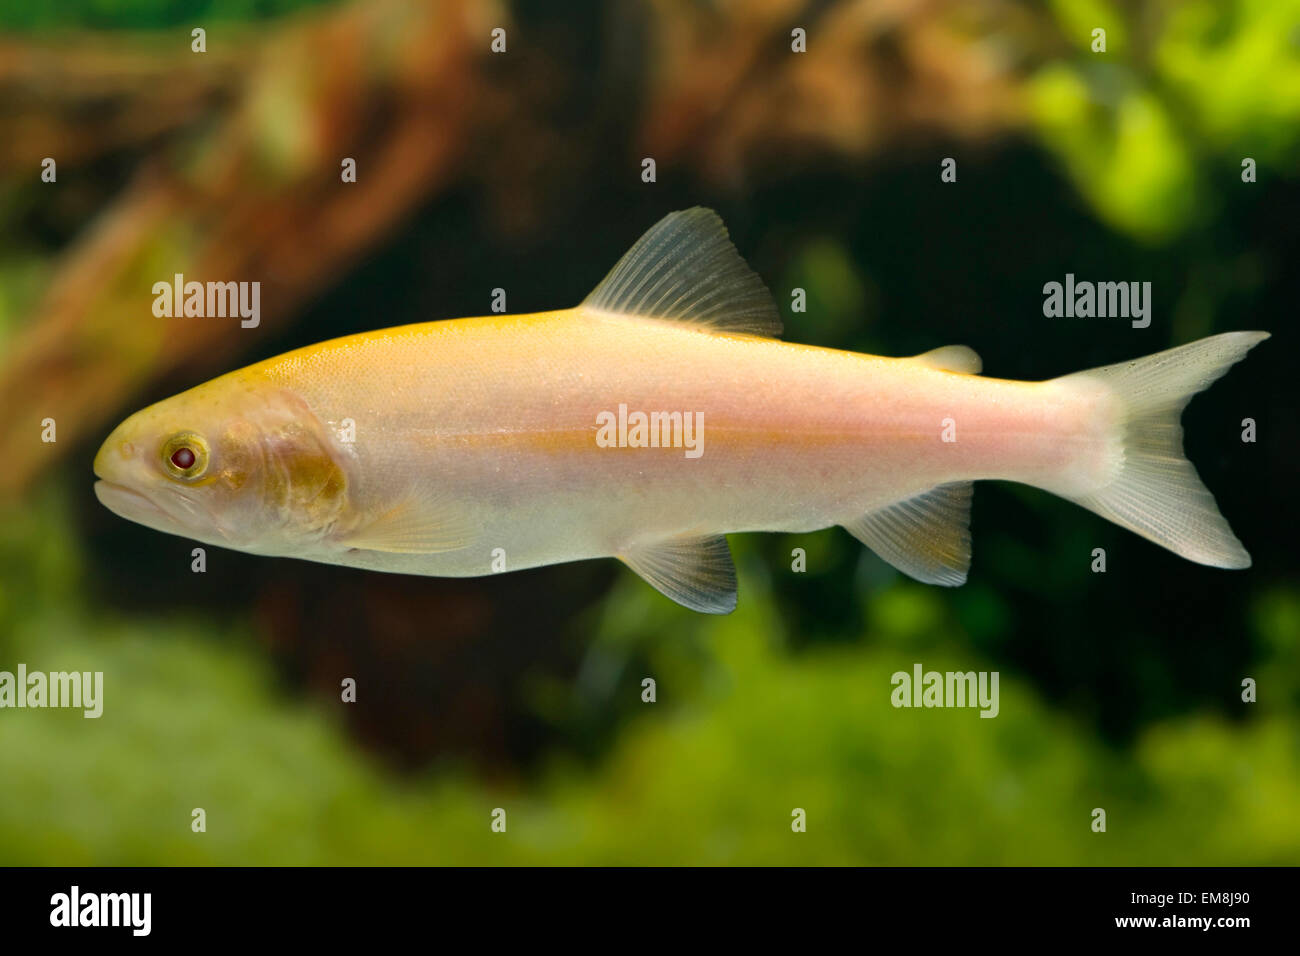 and hi-res fische images stock photography Gold Alamy -